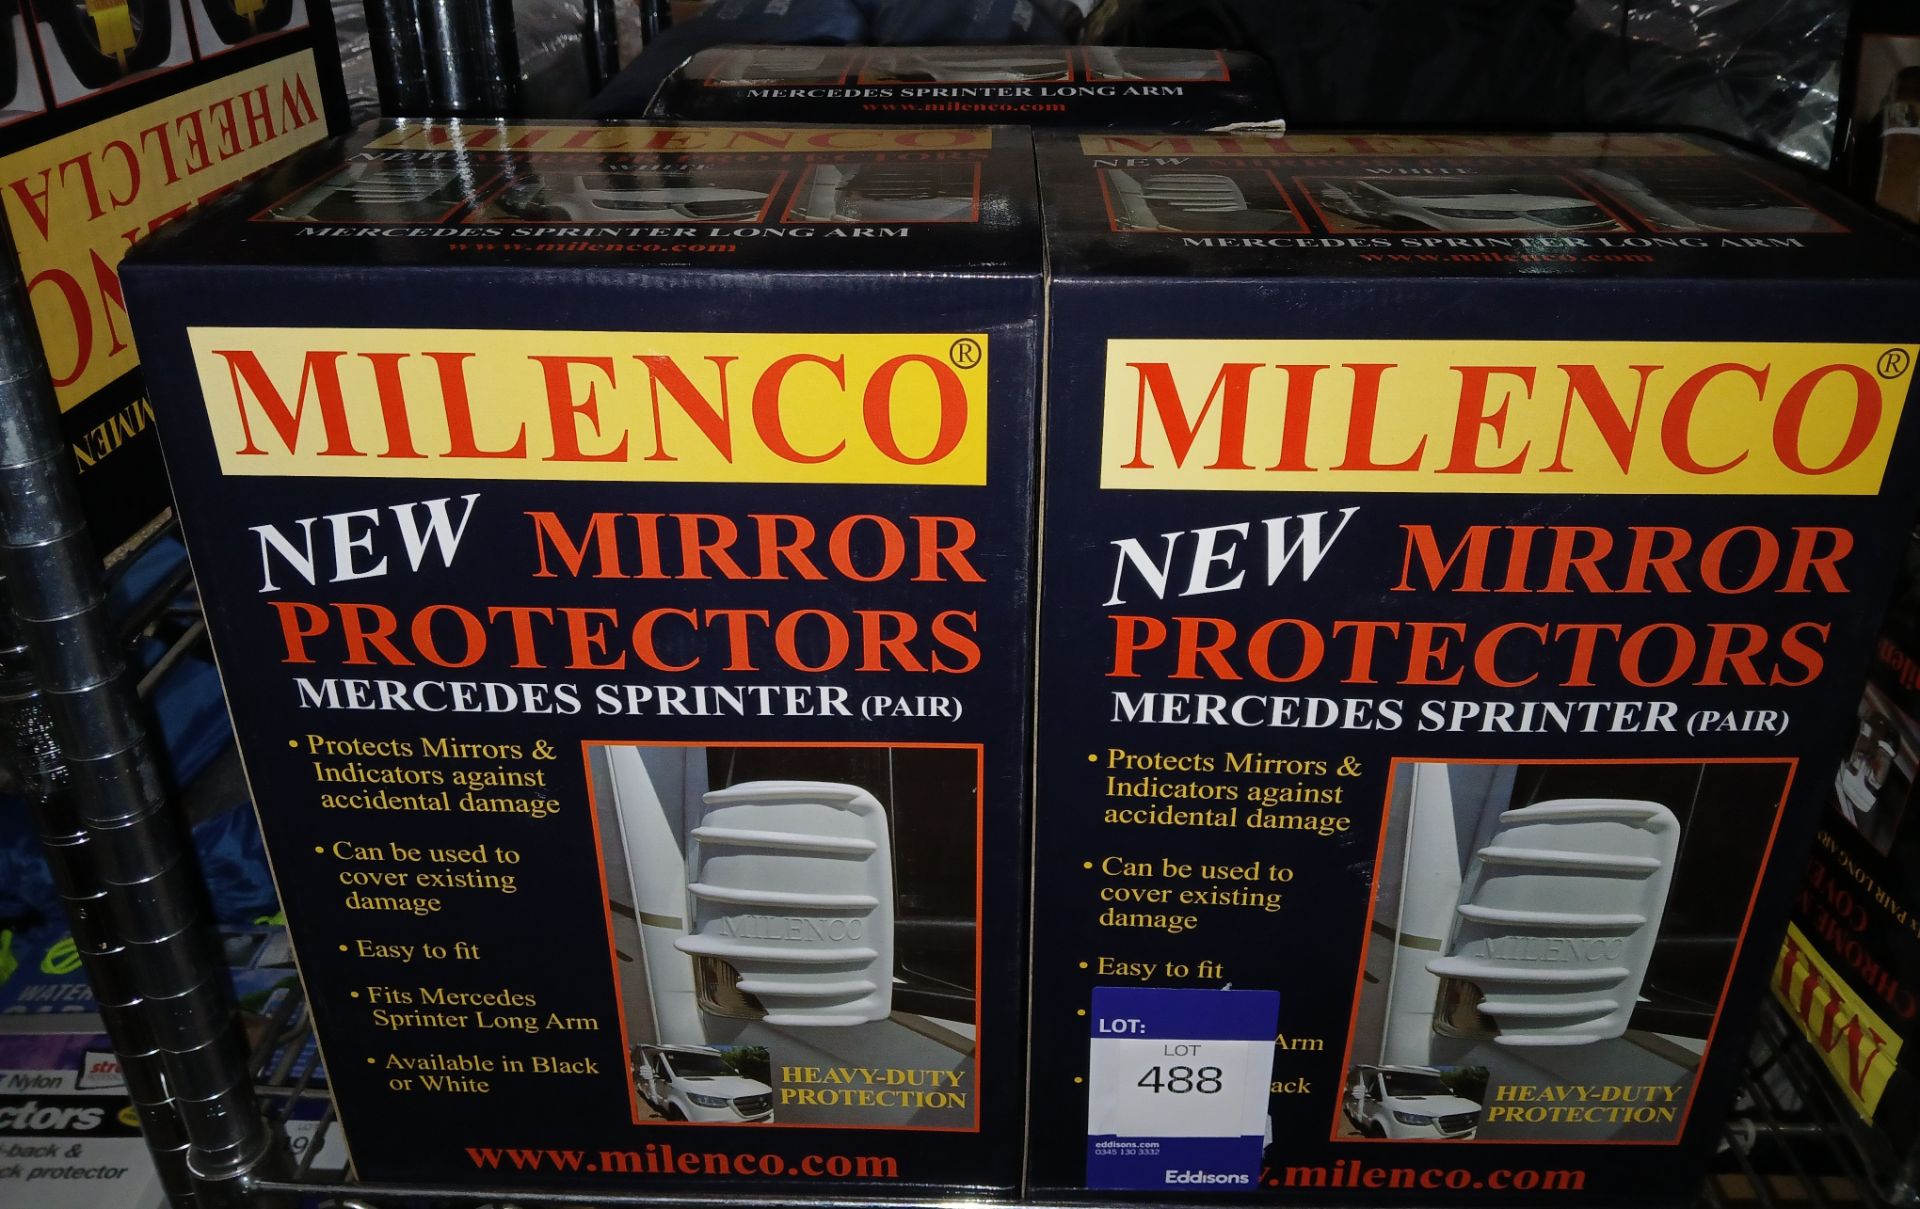 3 x Milenco Mirror Protectors (Please note, Viewing Strongly Recommended - Eddisons have not